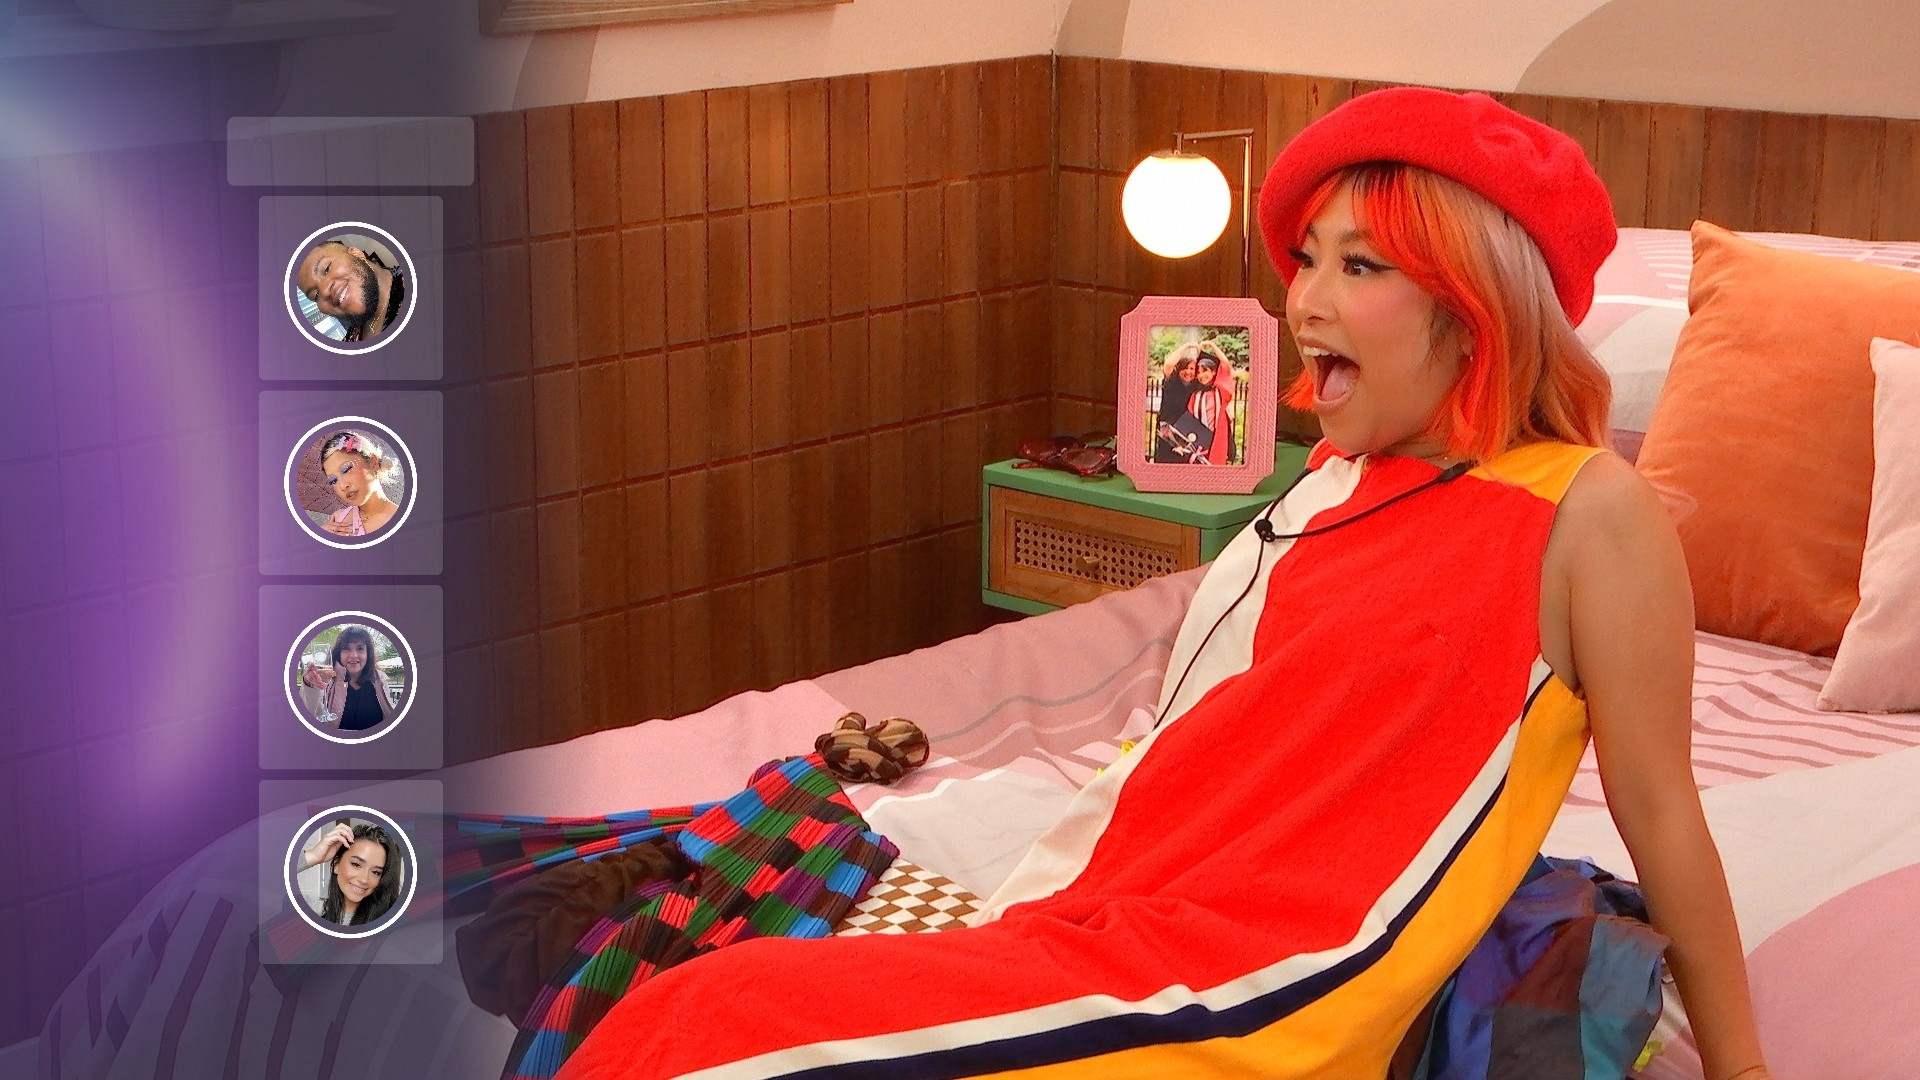 Person in bed dressed as character Judy Funnie from the cartoon &#x27;Doug&#x27;, looking surprised. Icons of other characters to the left